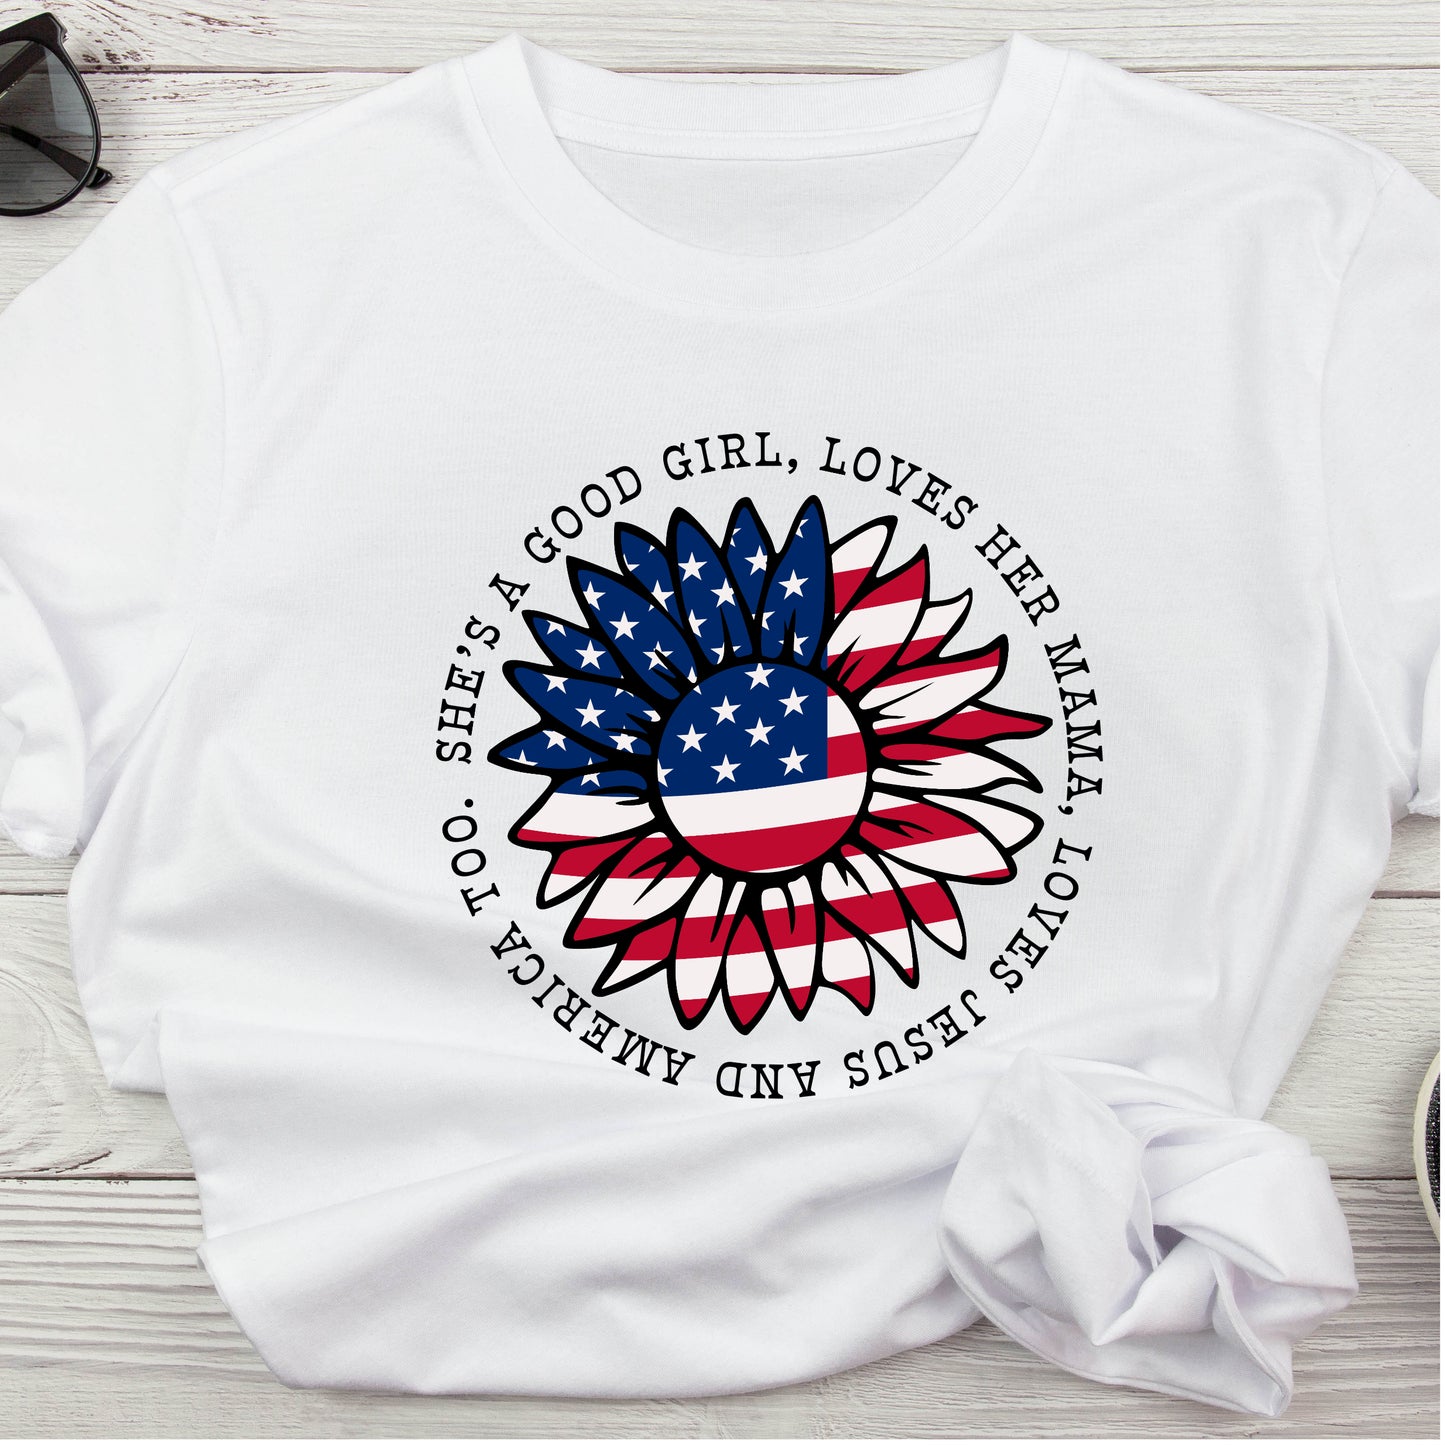 Patriotic Sunflower T Shirt Gift For Woman Song Lyric T-Shirt For Conservative Woman TShirt Good Girl T Shirt For Patriotic Girl TShirt